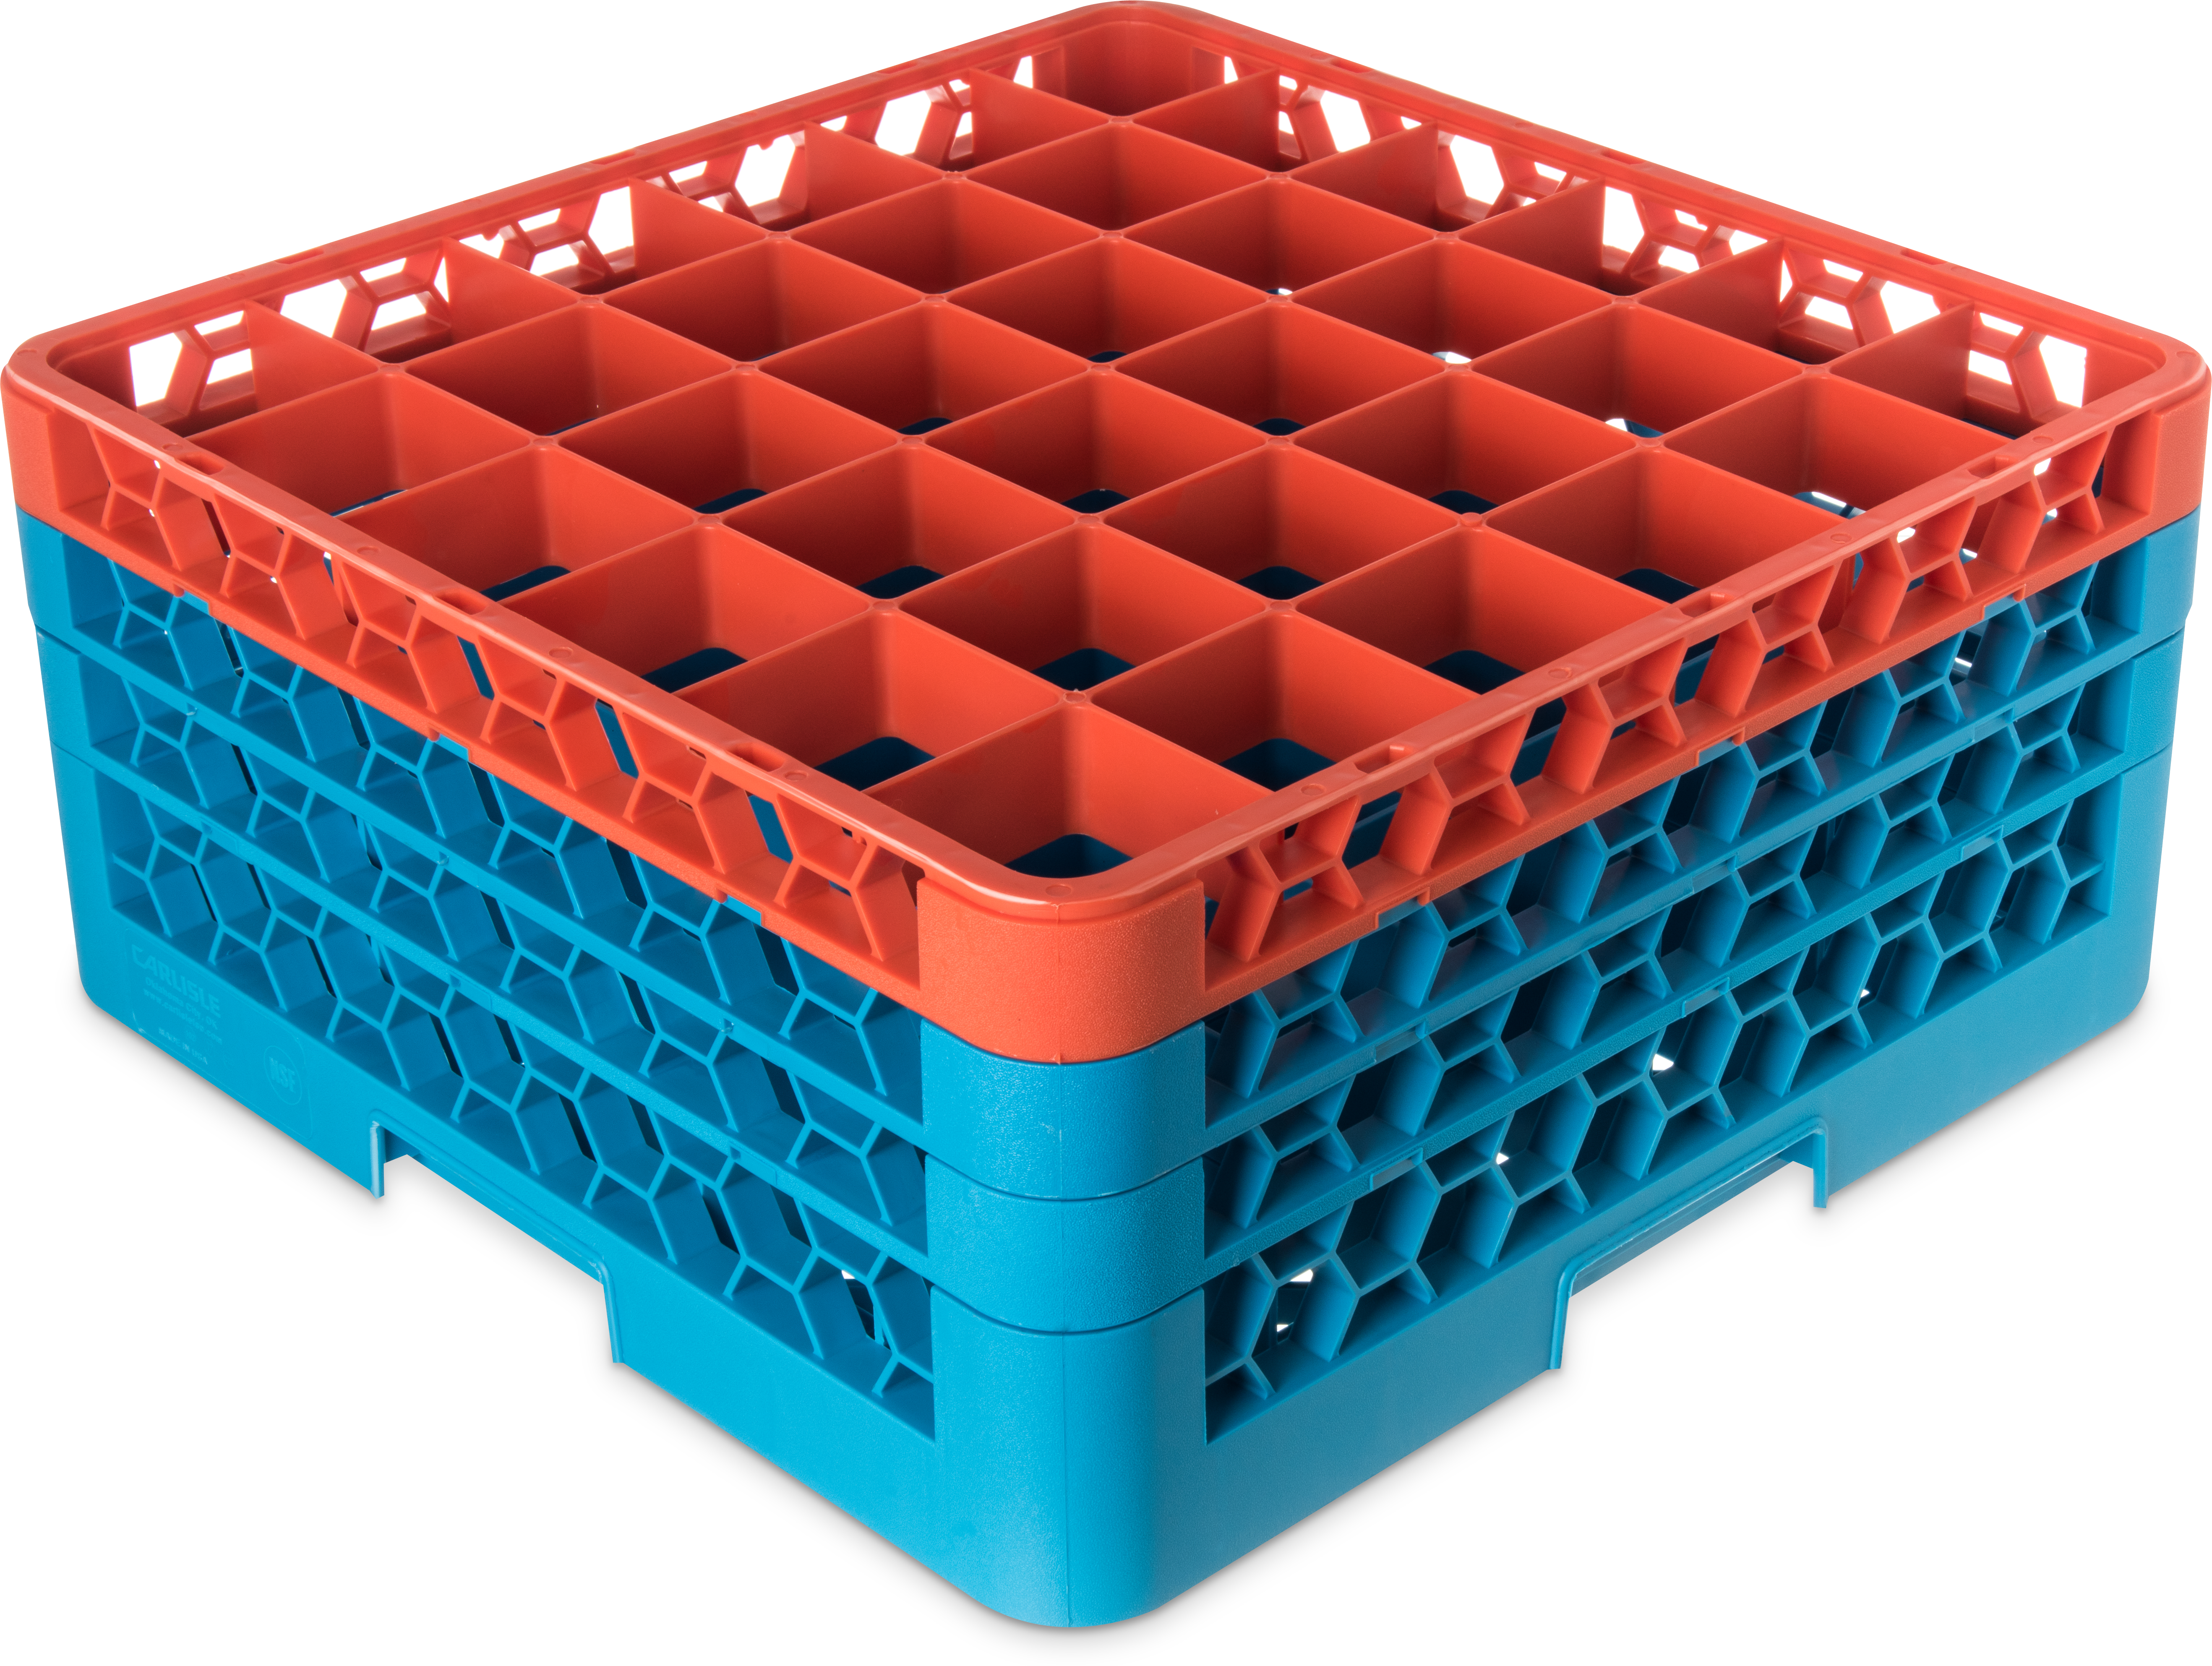 OptiClean 36 Compartment Glass Rack with 3 Extenders 8.72 - Orange-Carlisle Blue